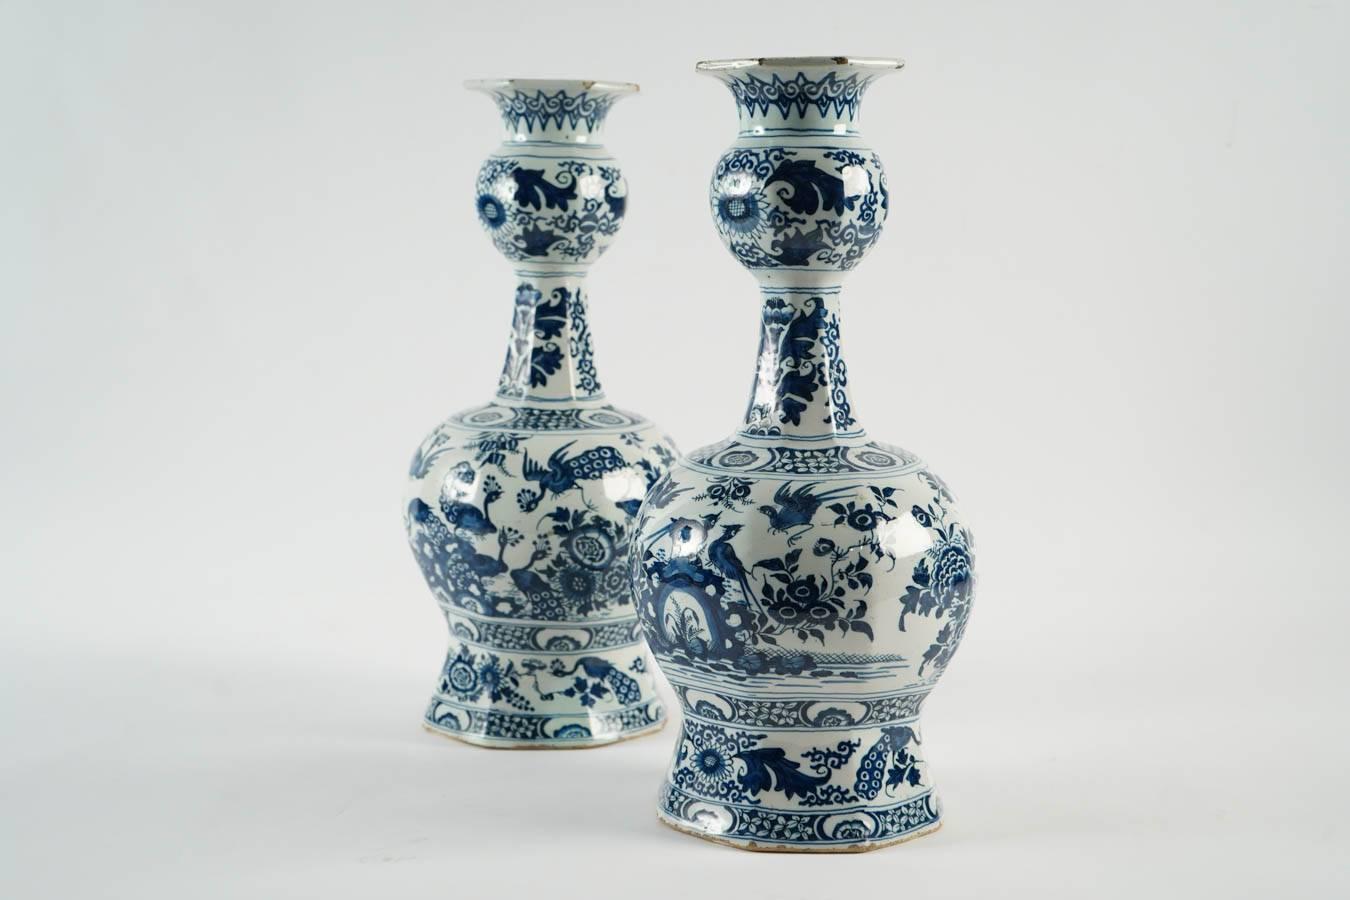 Pair of large faience bottled vases. Orthogonal base, round body with a narrow neck ended by an open bulb.
Hand-painted in Delft blue shades the ornamentation consists of a blossoming landscape with lotus, tulips and chrysanthemums among waters and